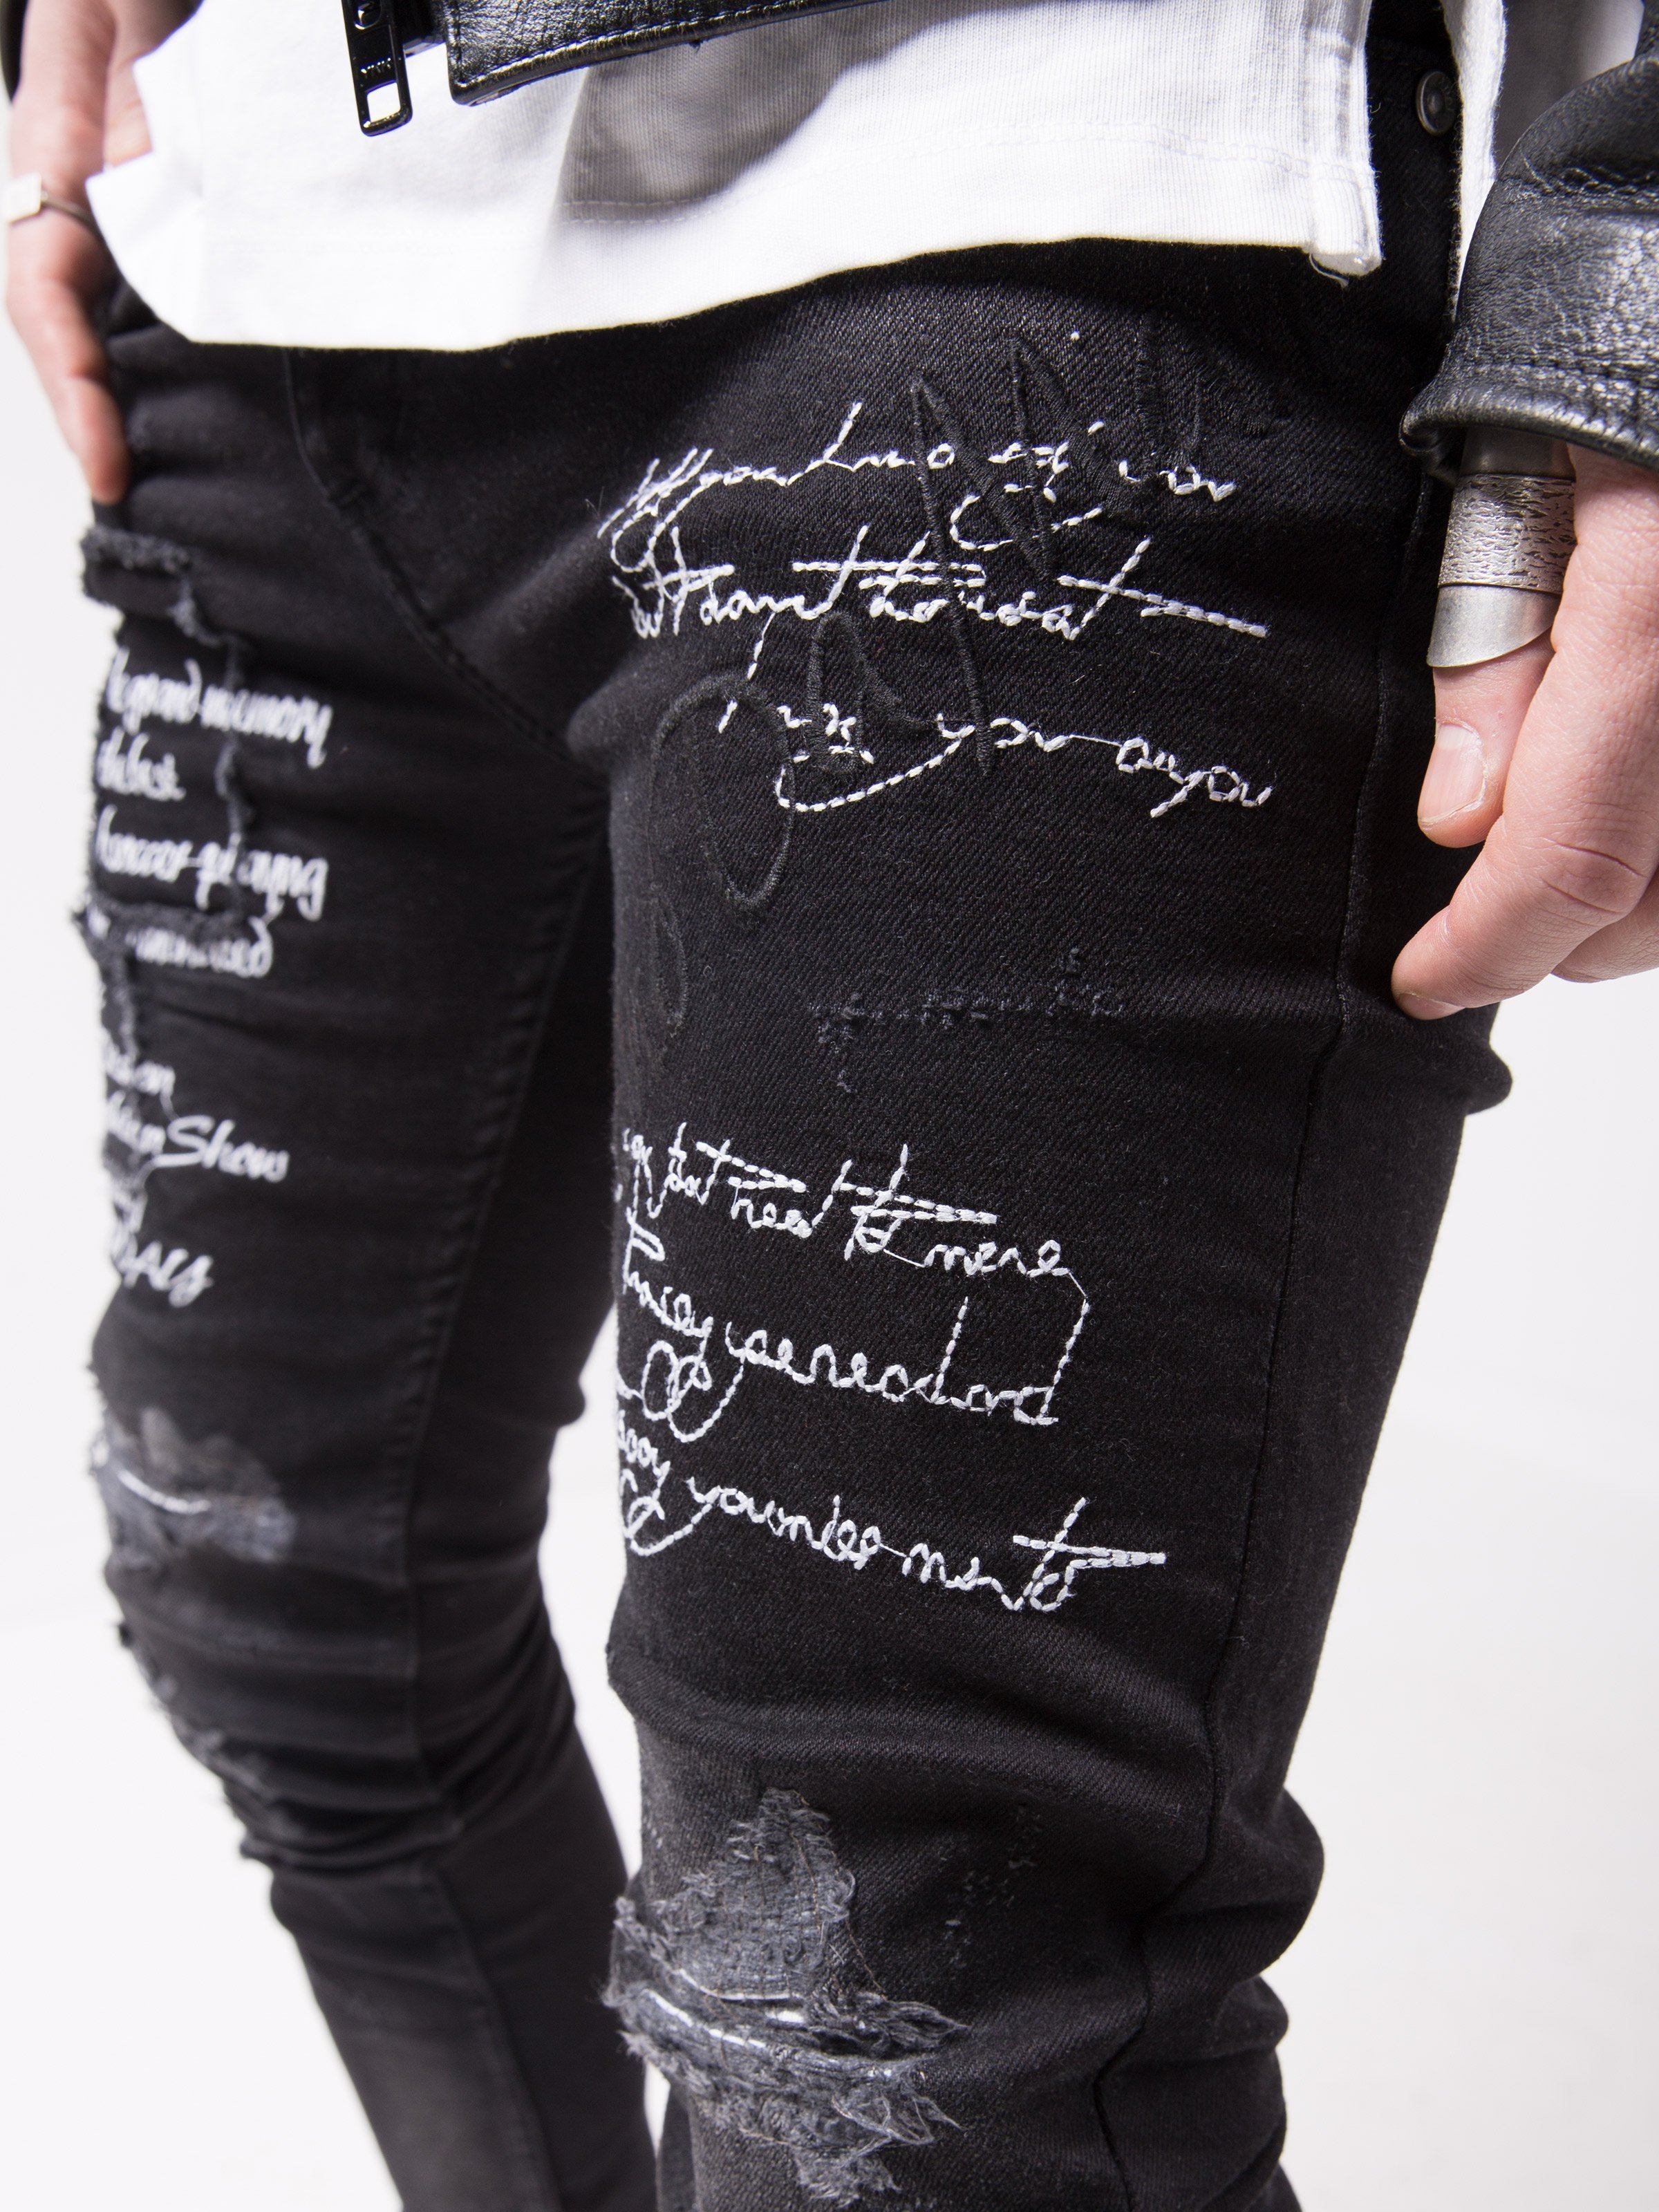 A man wearing a pair of BLACK STONE jeans with writing on them.